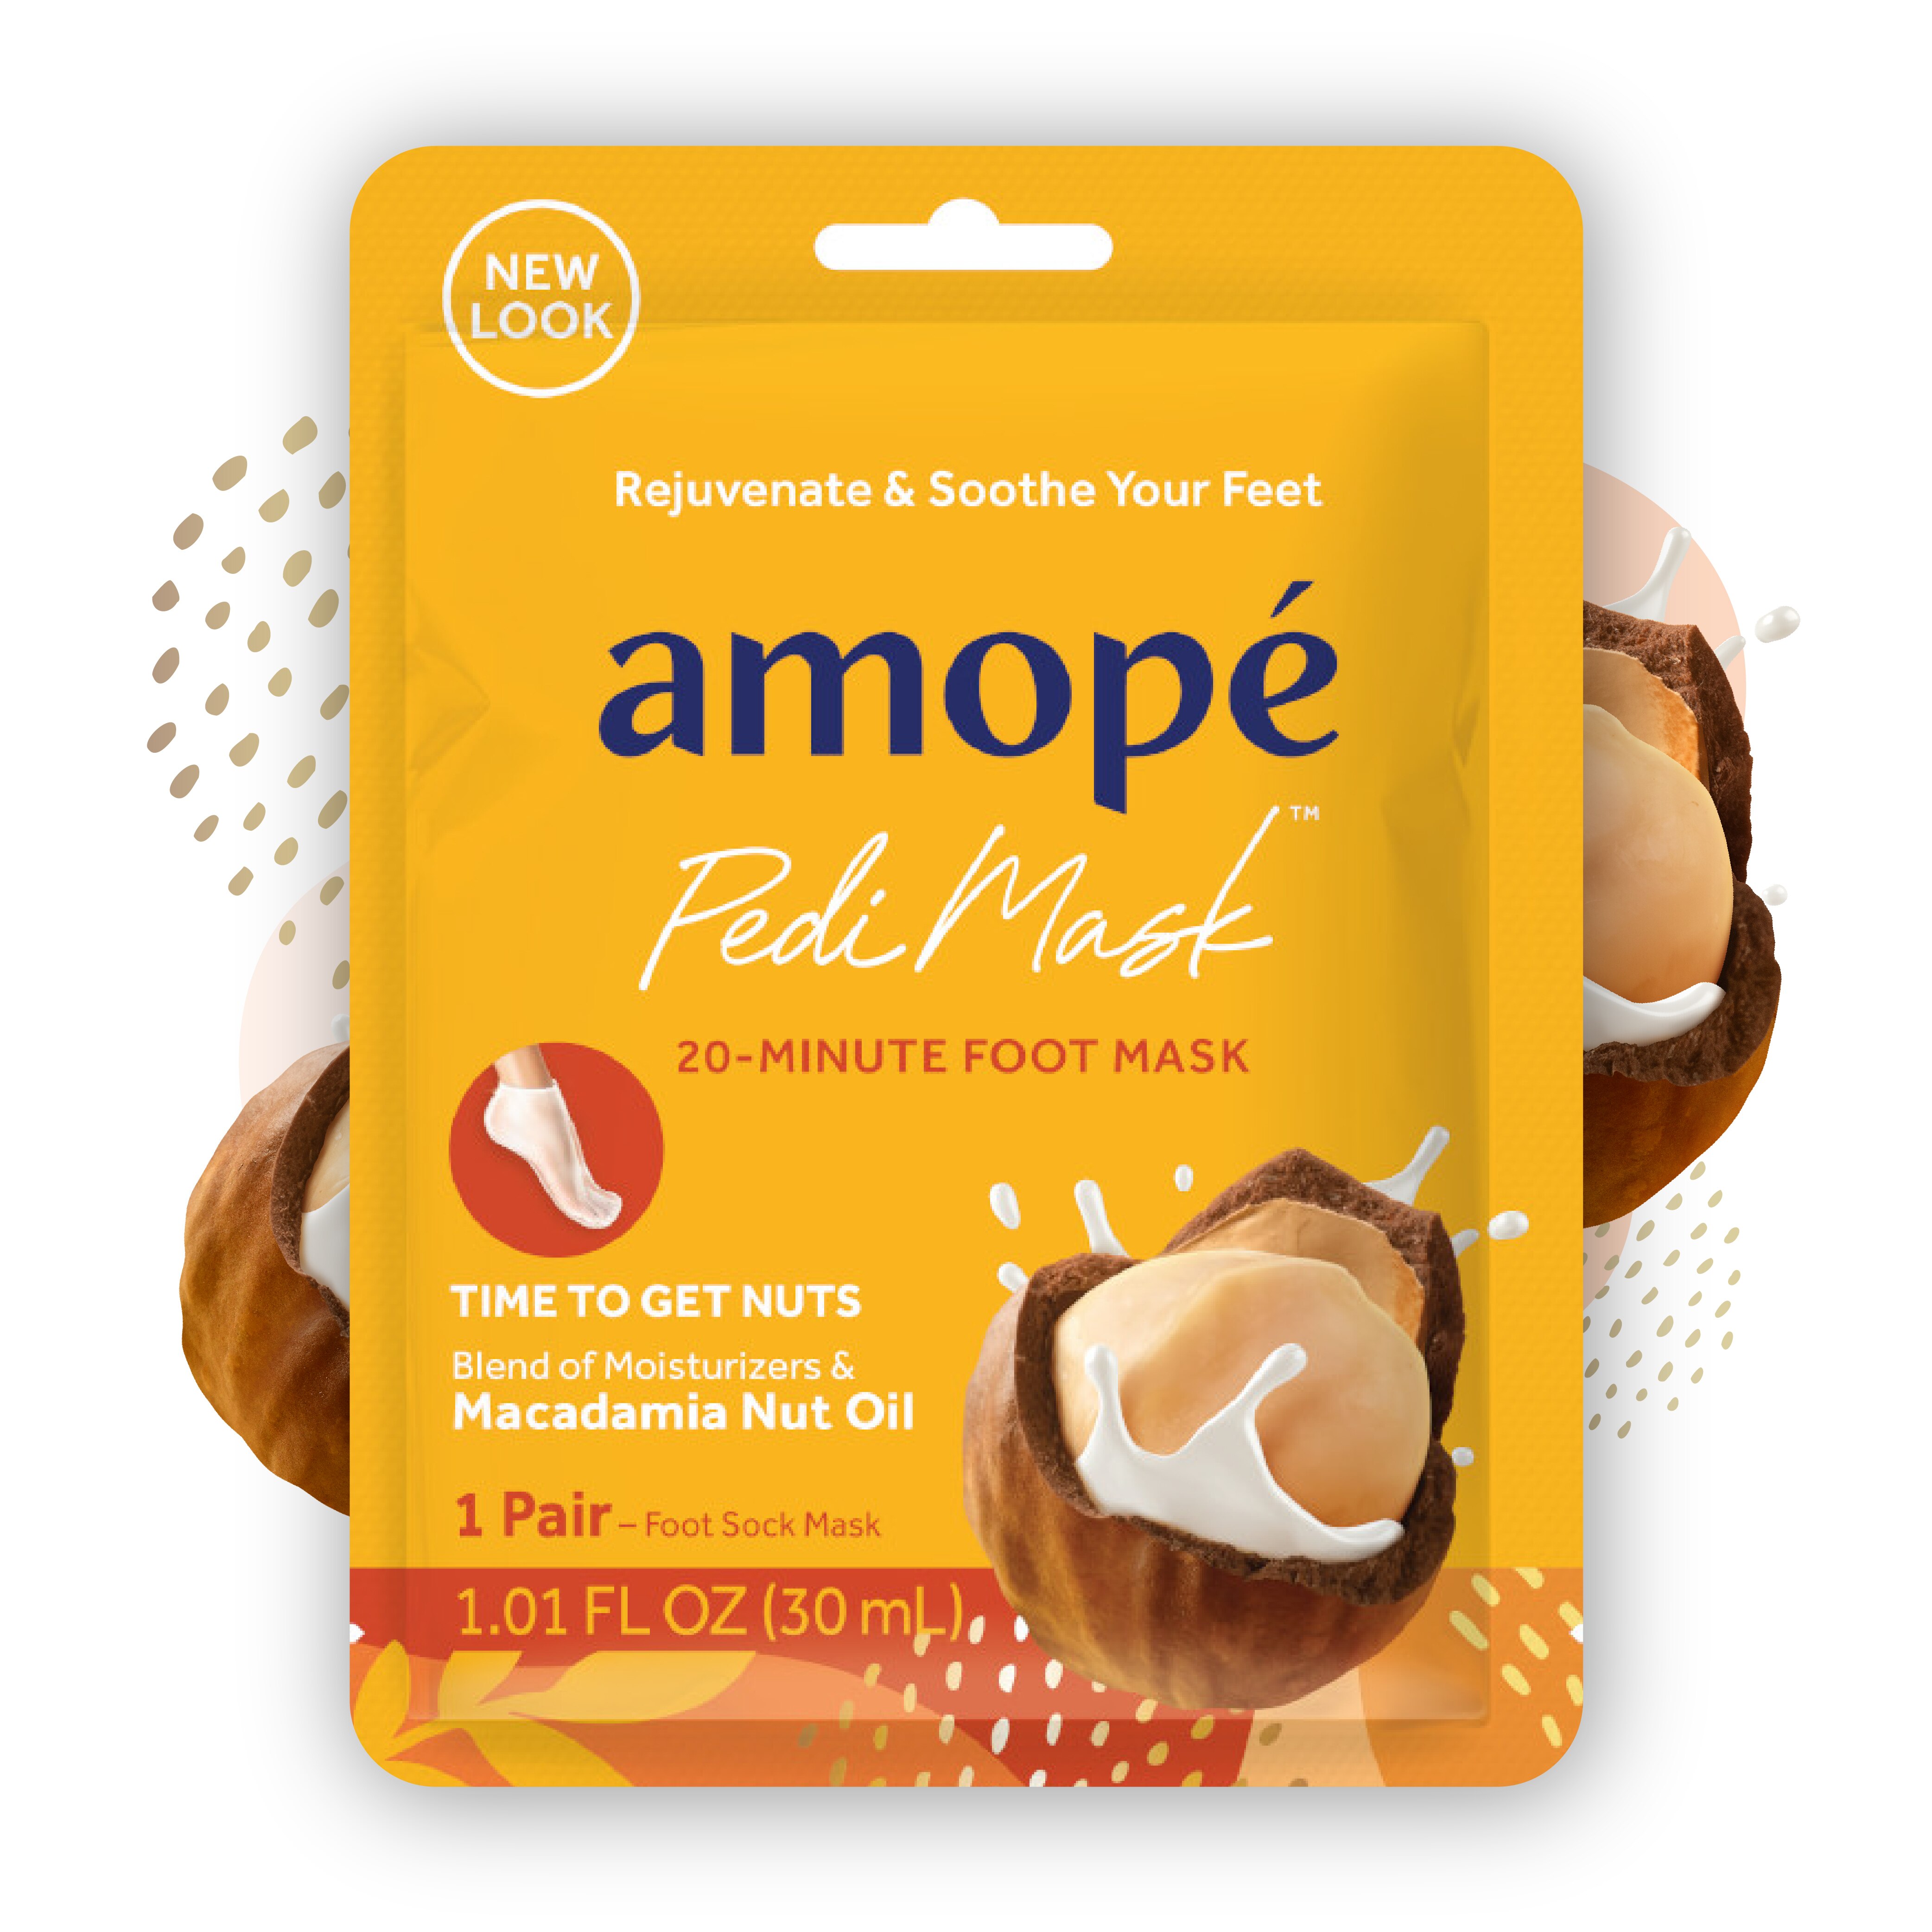 Amope PediMask 20-Minute Foot Mask - Time To Get Nuts With Macadamia Nut Oil - 2 Ct , CVS